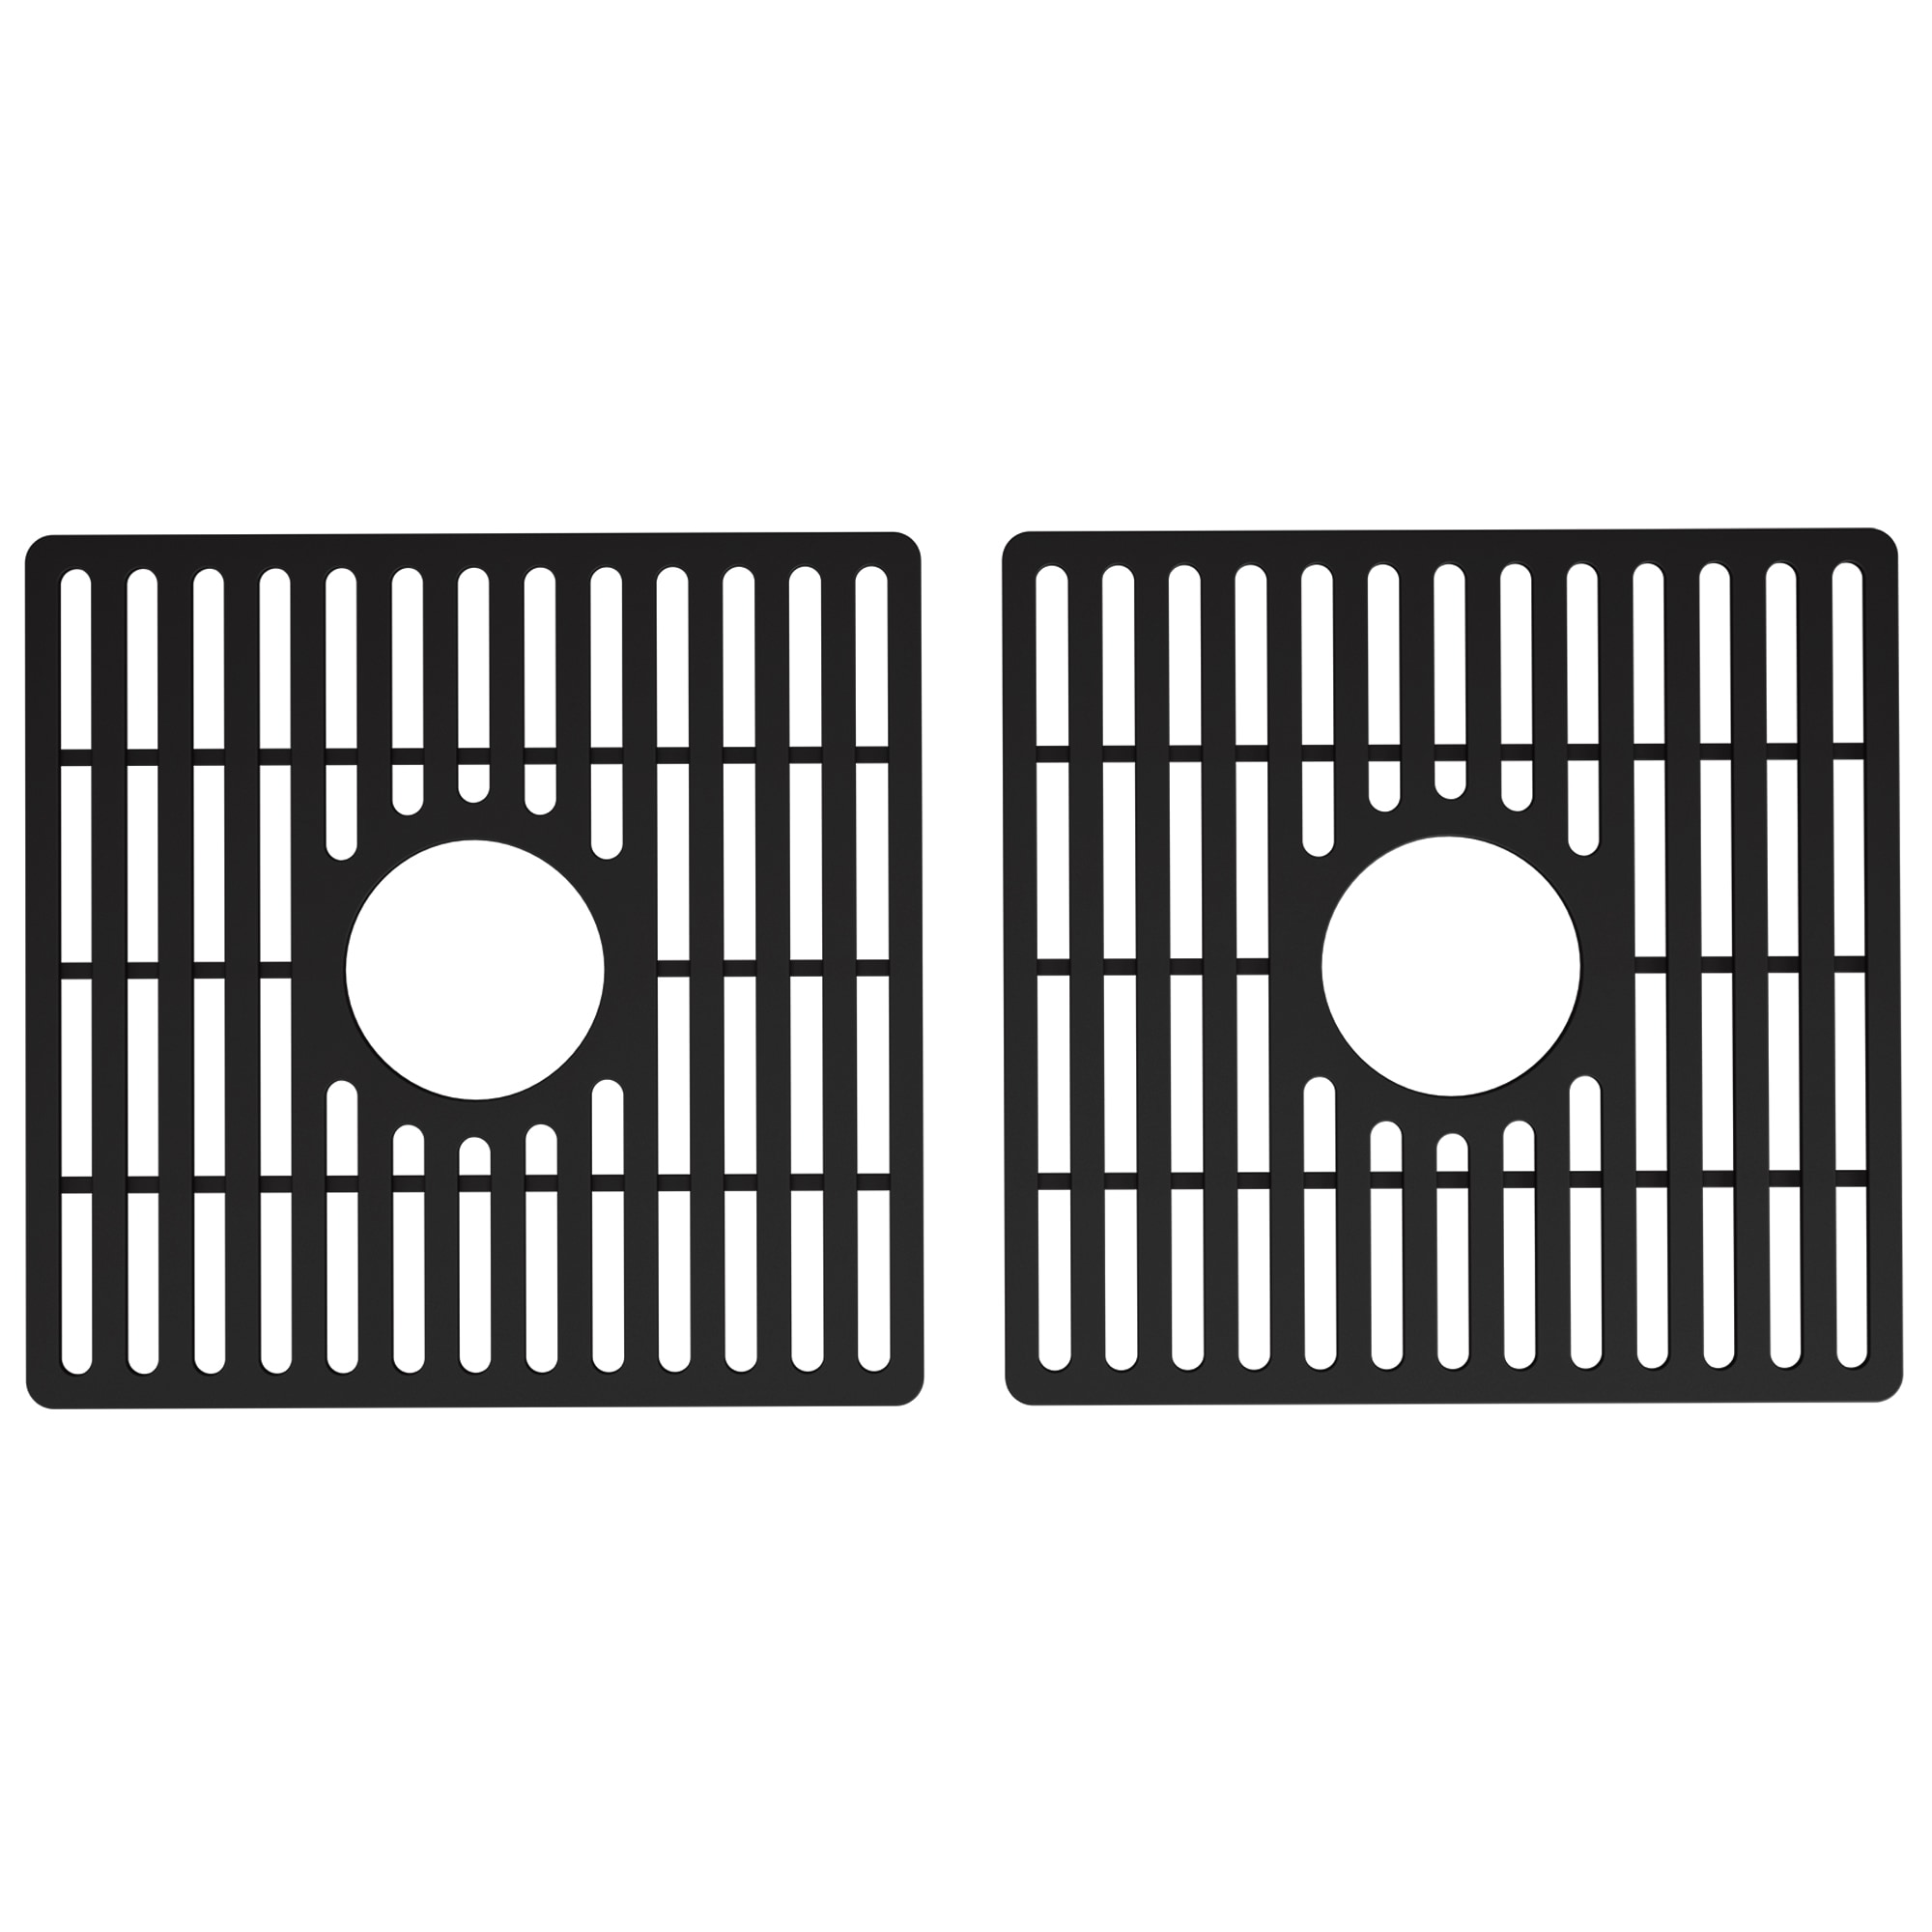 Dependable Industries Vinyl Coated Sink Protector Grid Black Insert Rack  10 x 12 x 1H Size Small